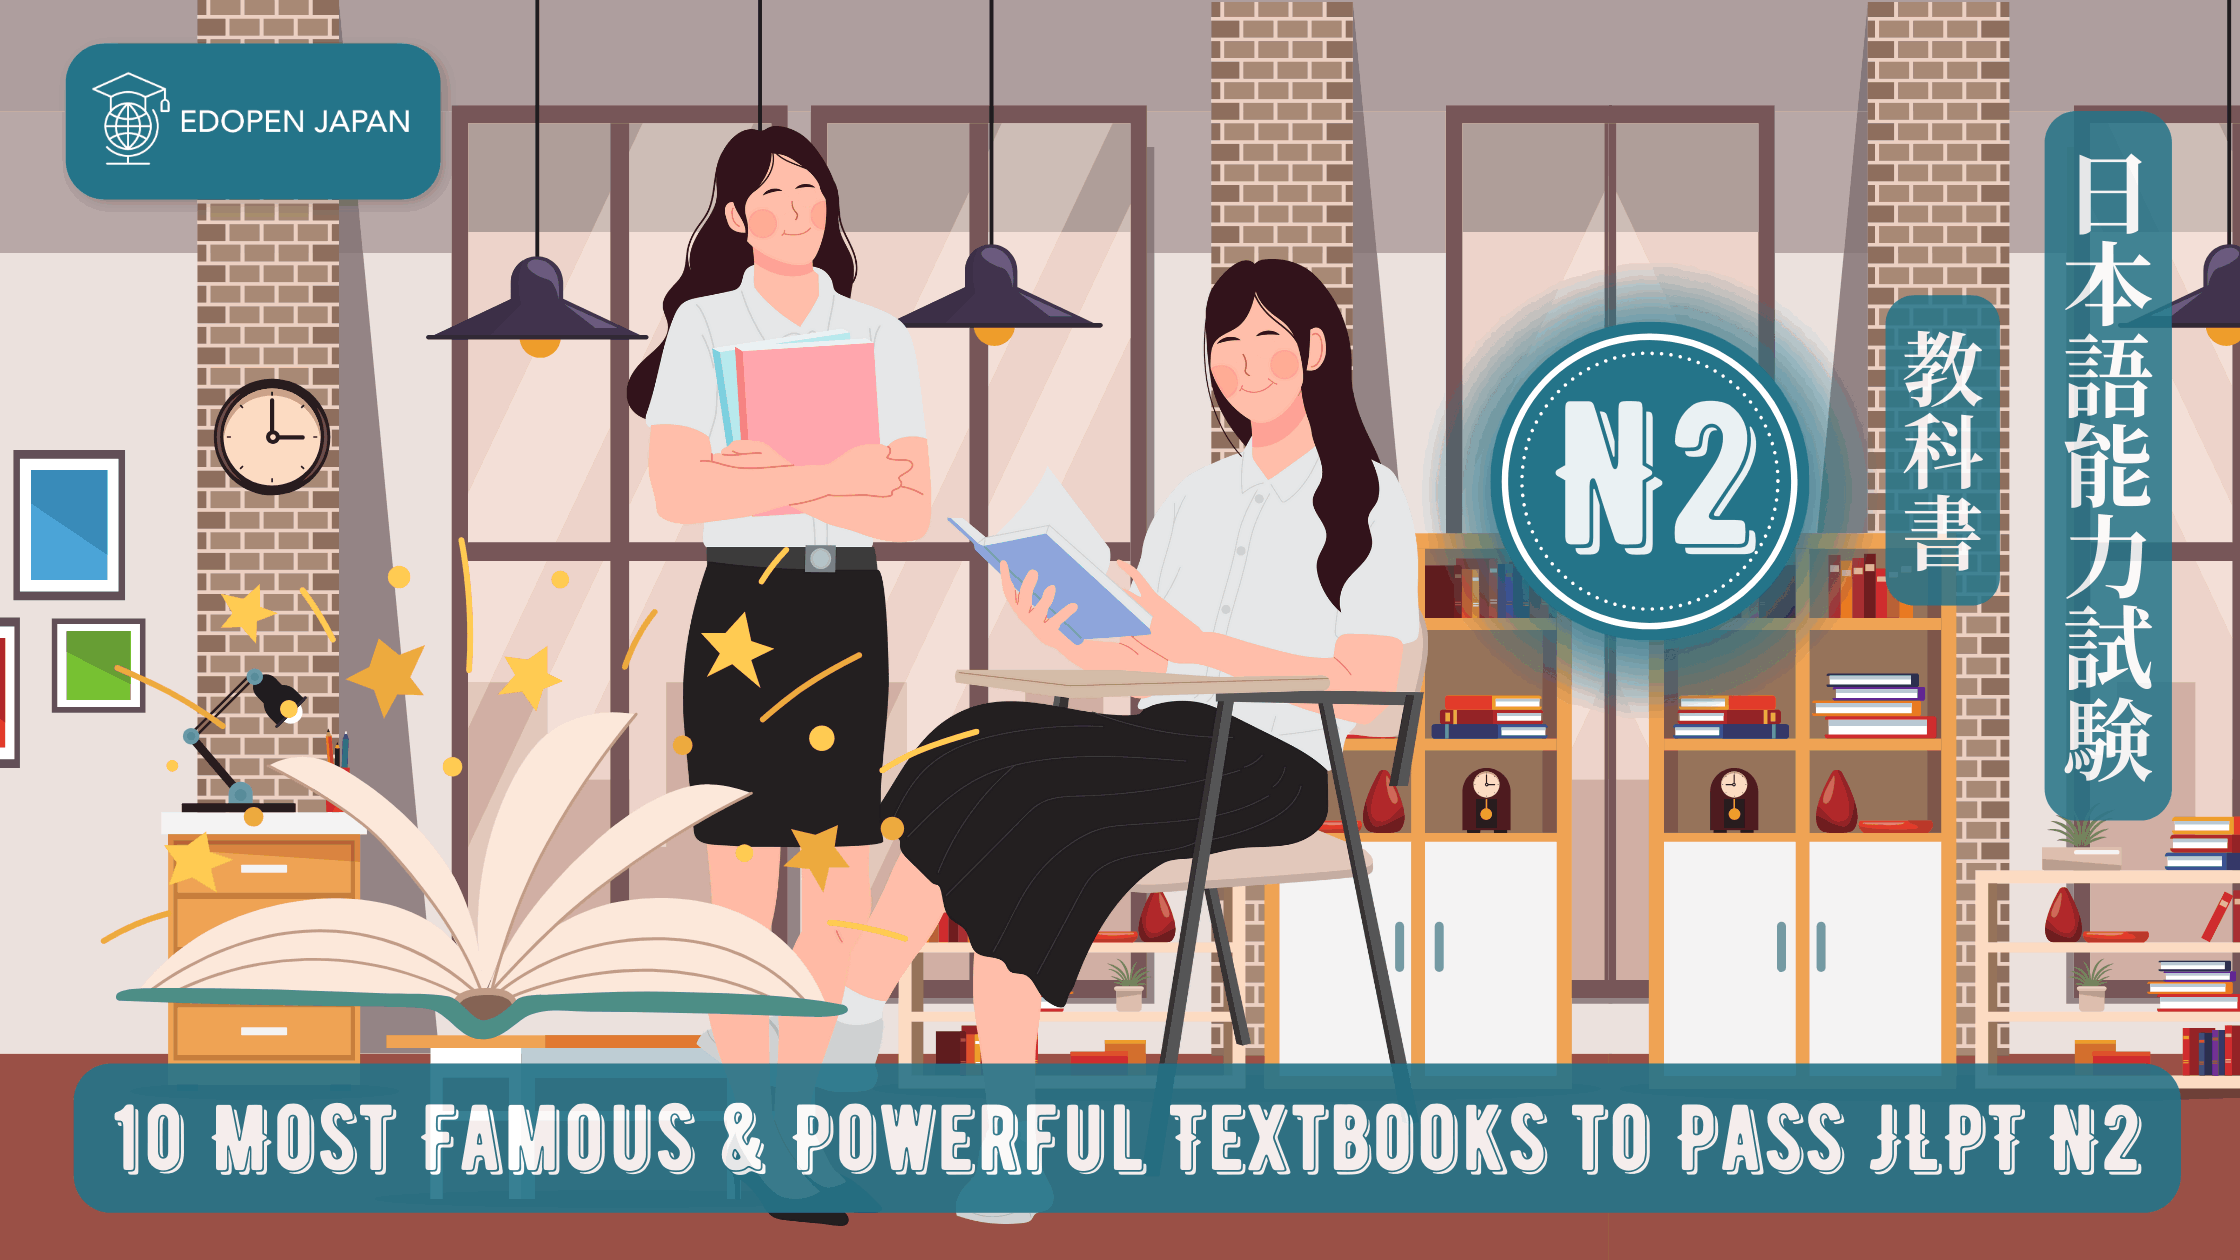 10 Most Famous & Powerful Textbooks to Pass JLPT N2 - EDOPEN Japan